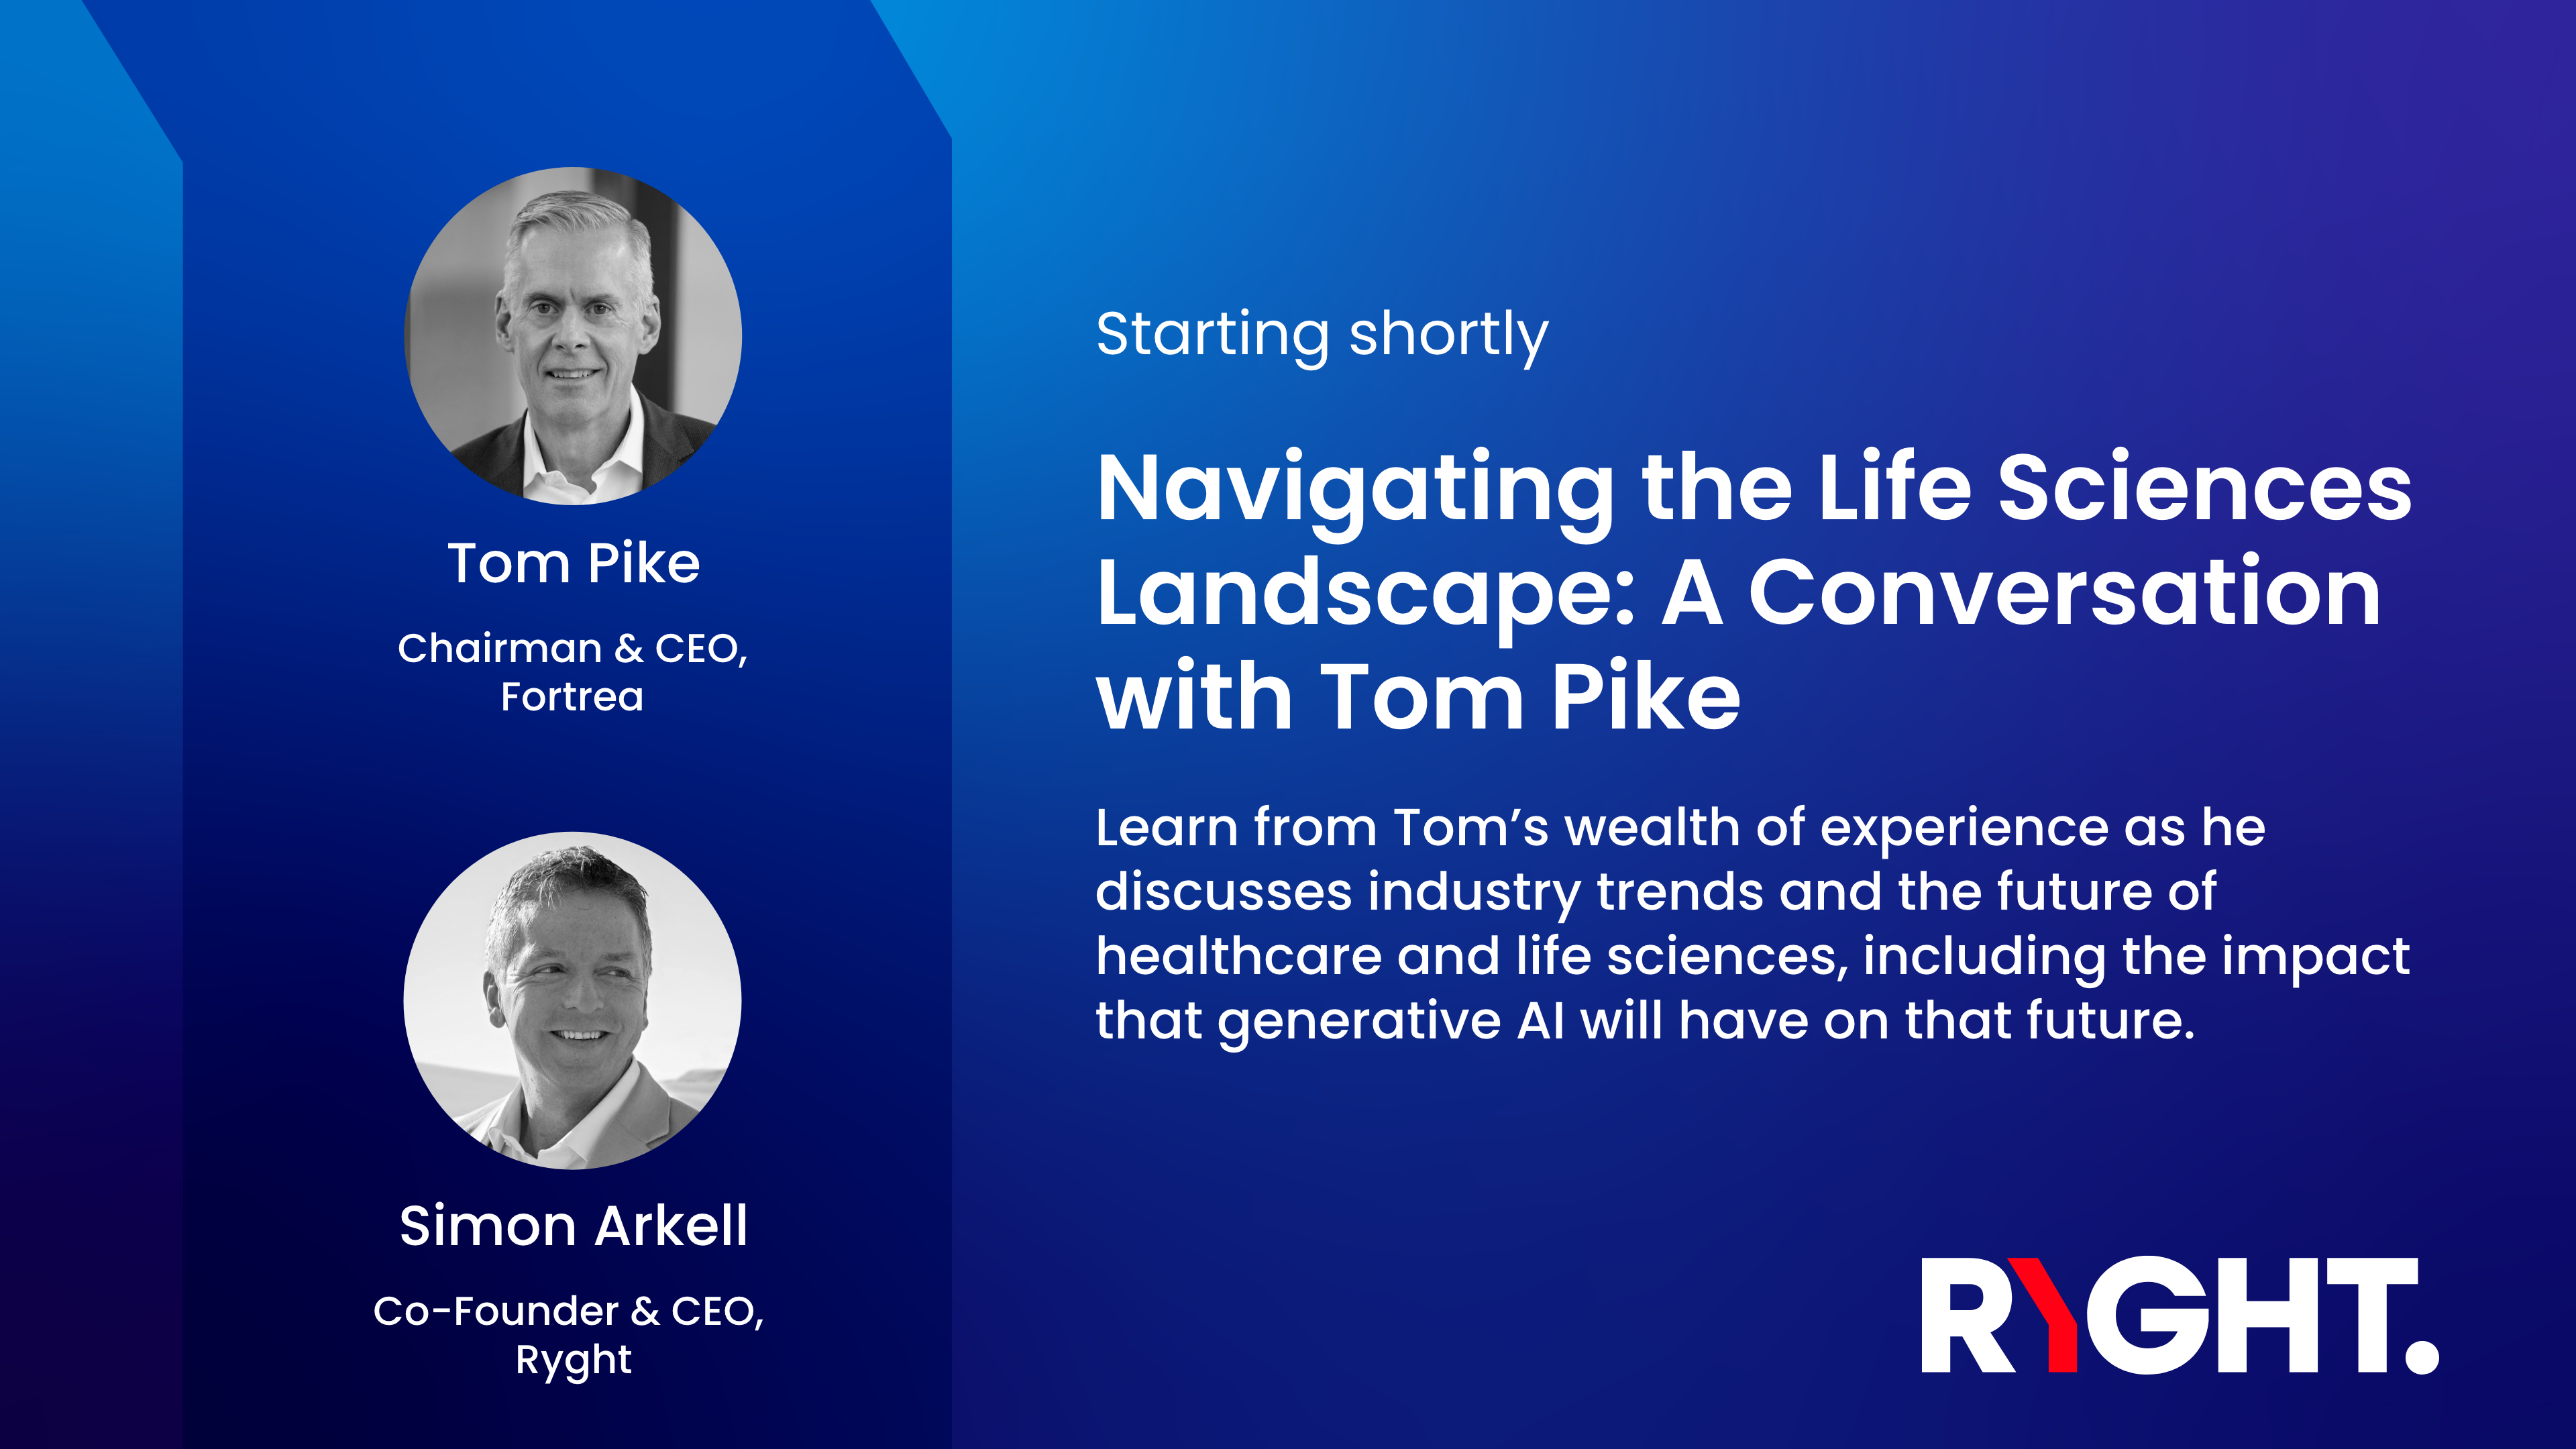 Navigating the Life Sciences Landscape: A Conversation with Tom Pike